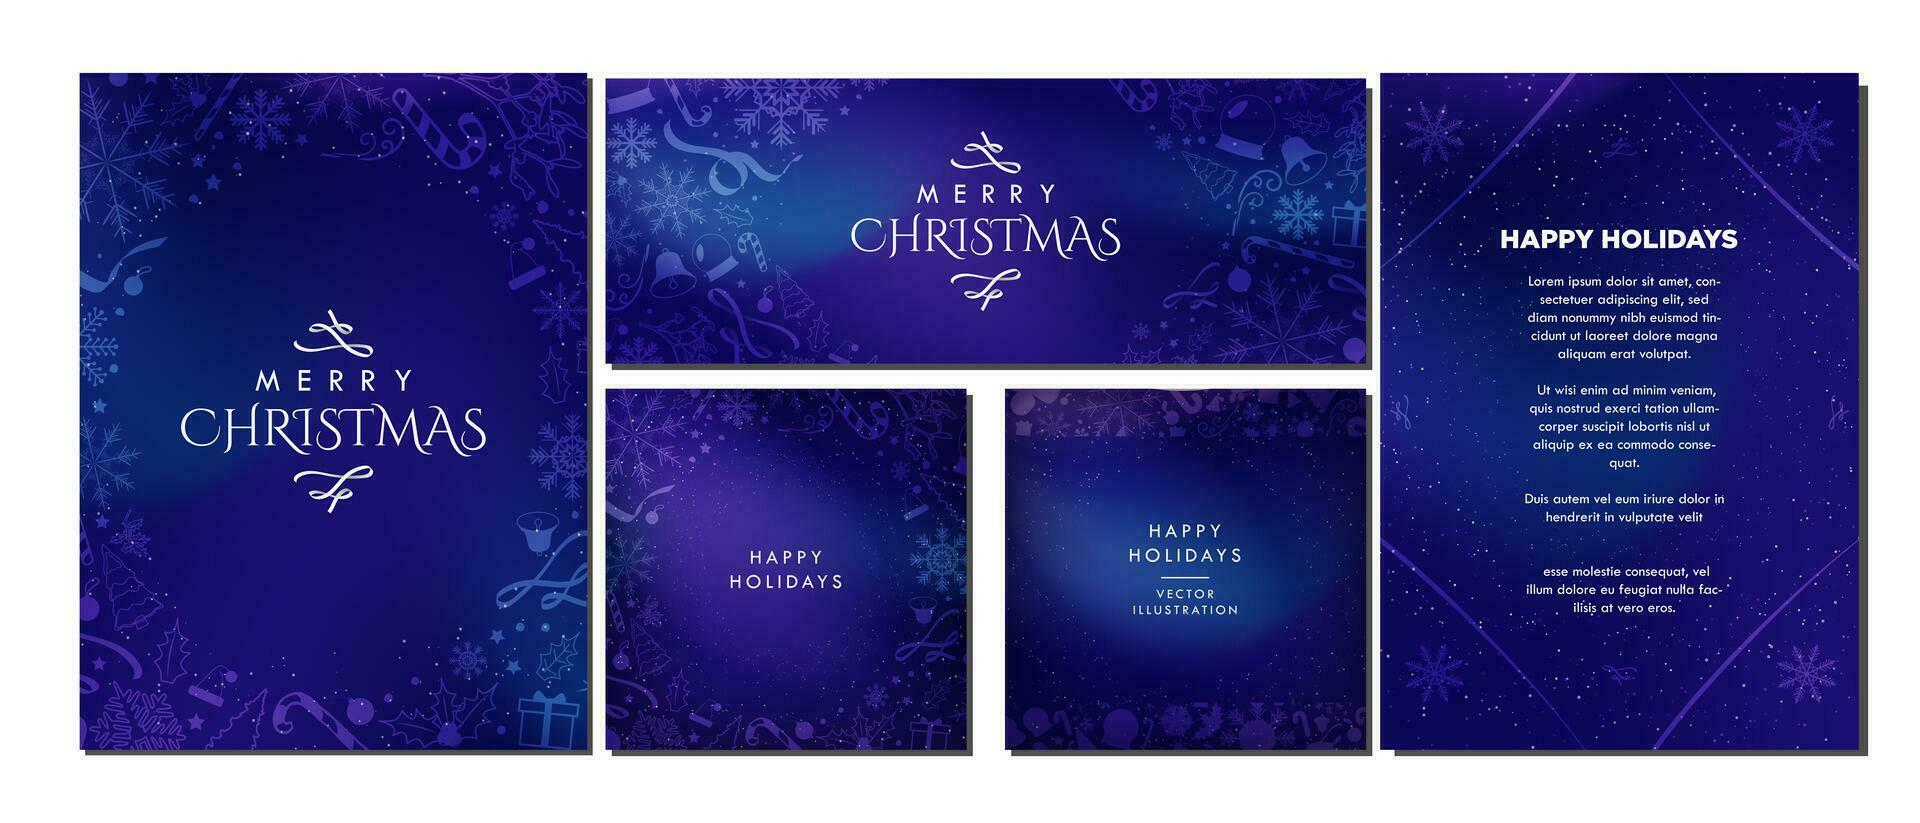 Stylish Christmas theme Backgrounds in blue gradient background and decorated with soft white Christmas elements. Beautiful minimalist Winter templates. Card, banners, posters. Vector Illustration.